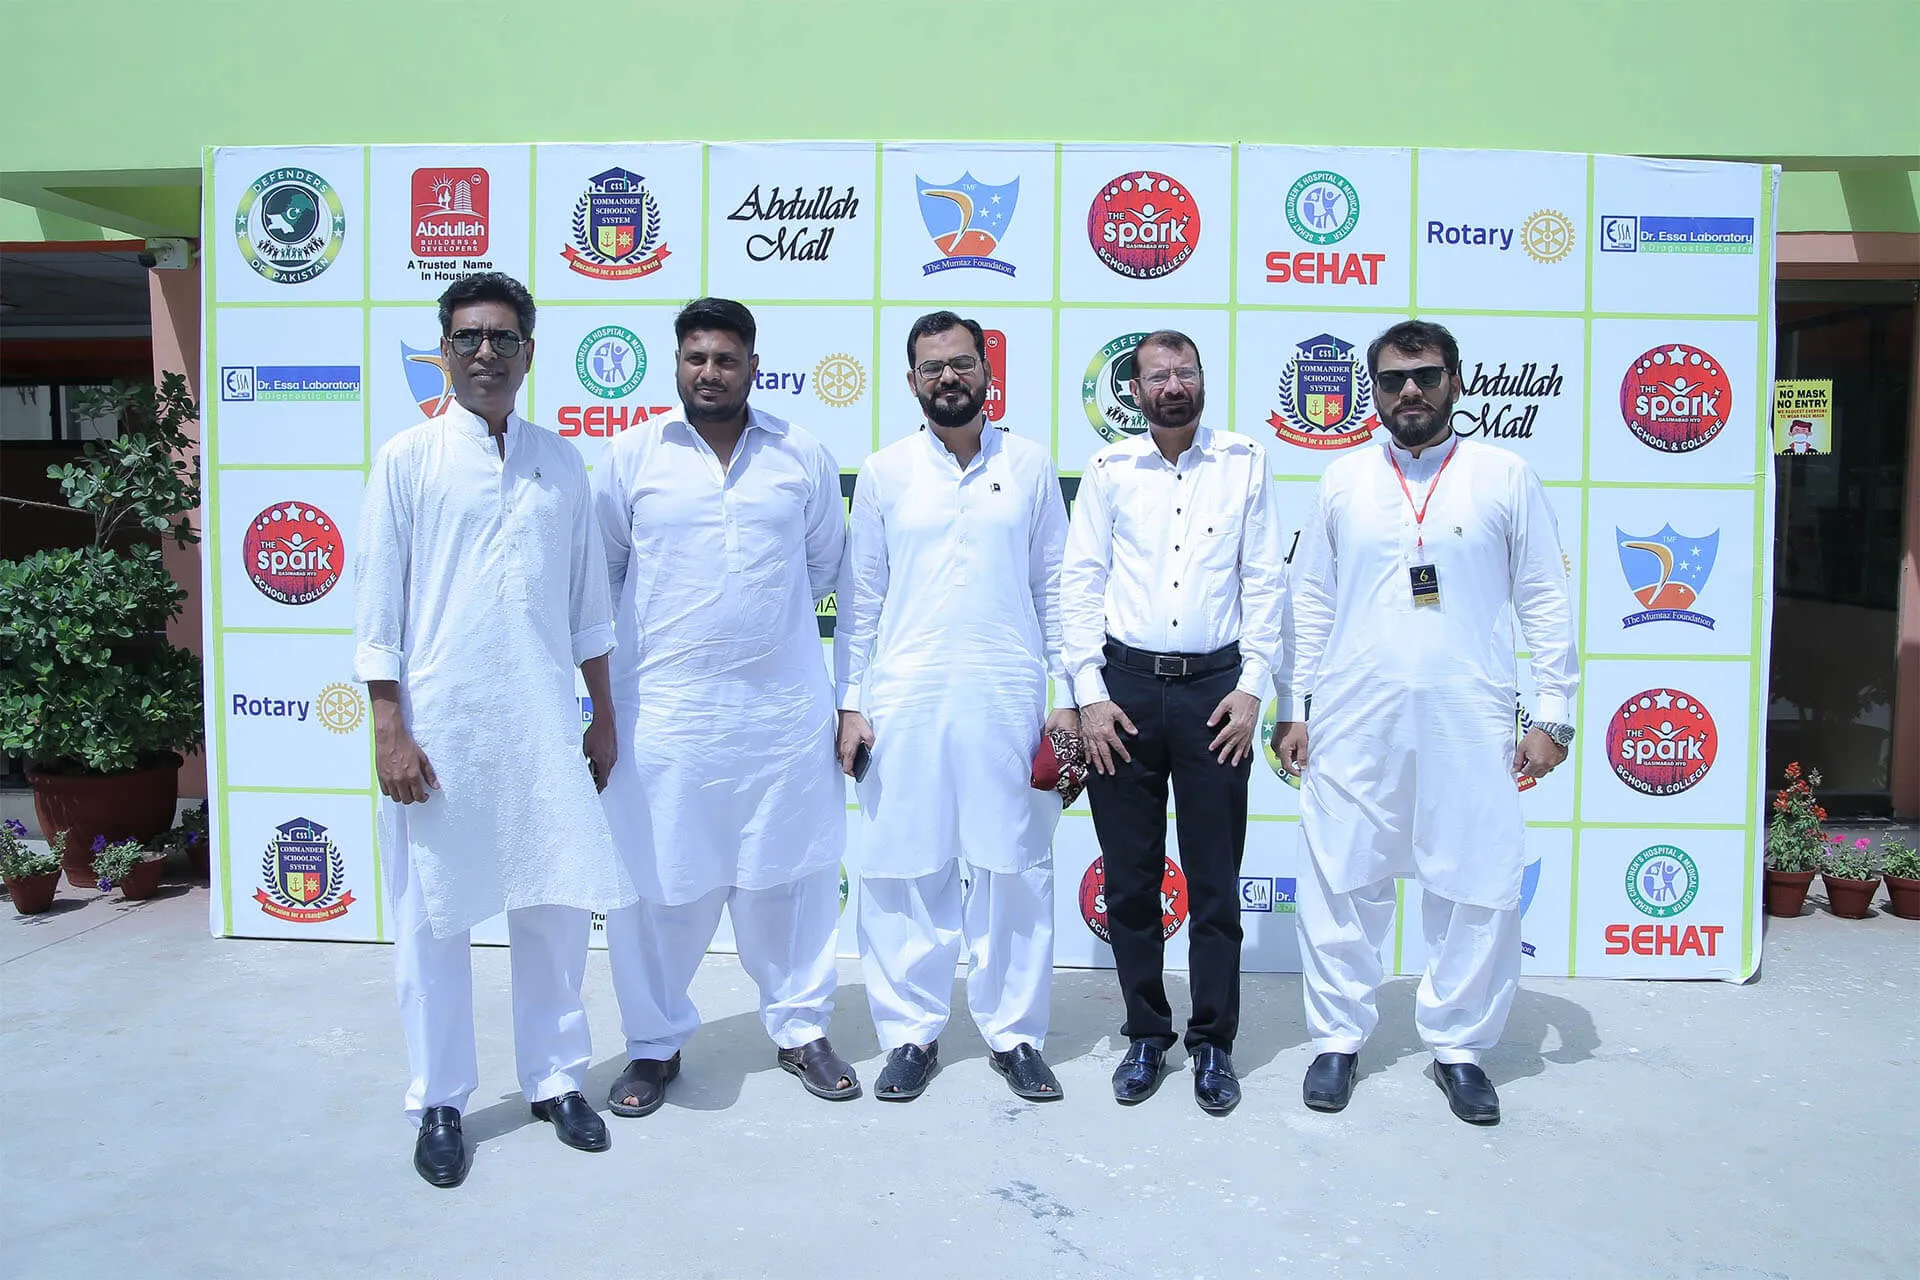 PAKISTAN DAY, ABDULLAH GROUP HELD A FLAG HOISTING CEREMONY